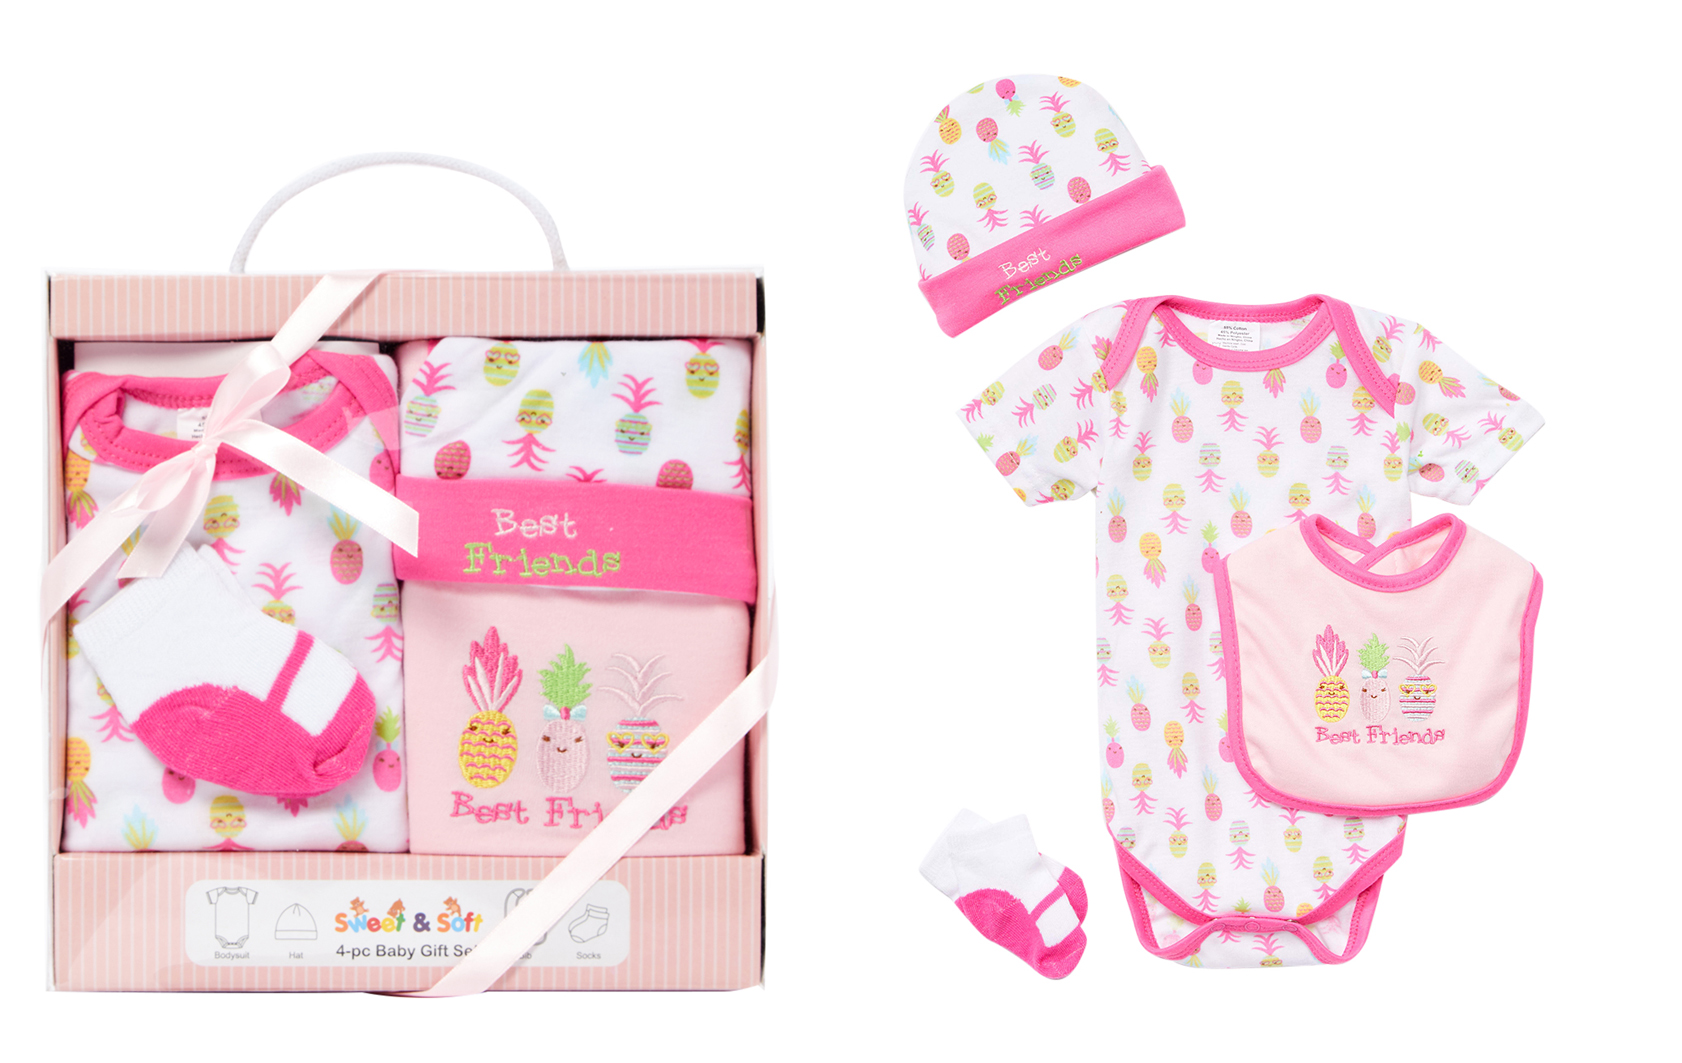 4 PC. Baby Girl's Gift Box Sets w/ Embroidered Best Friend & Pineapple Print